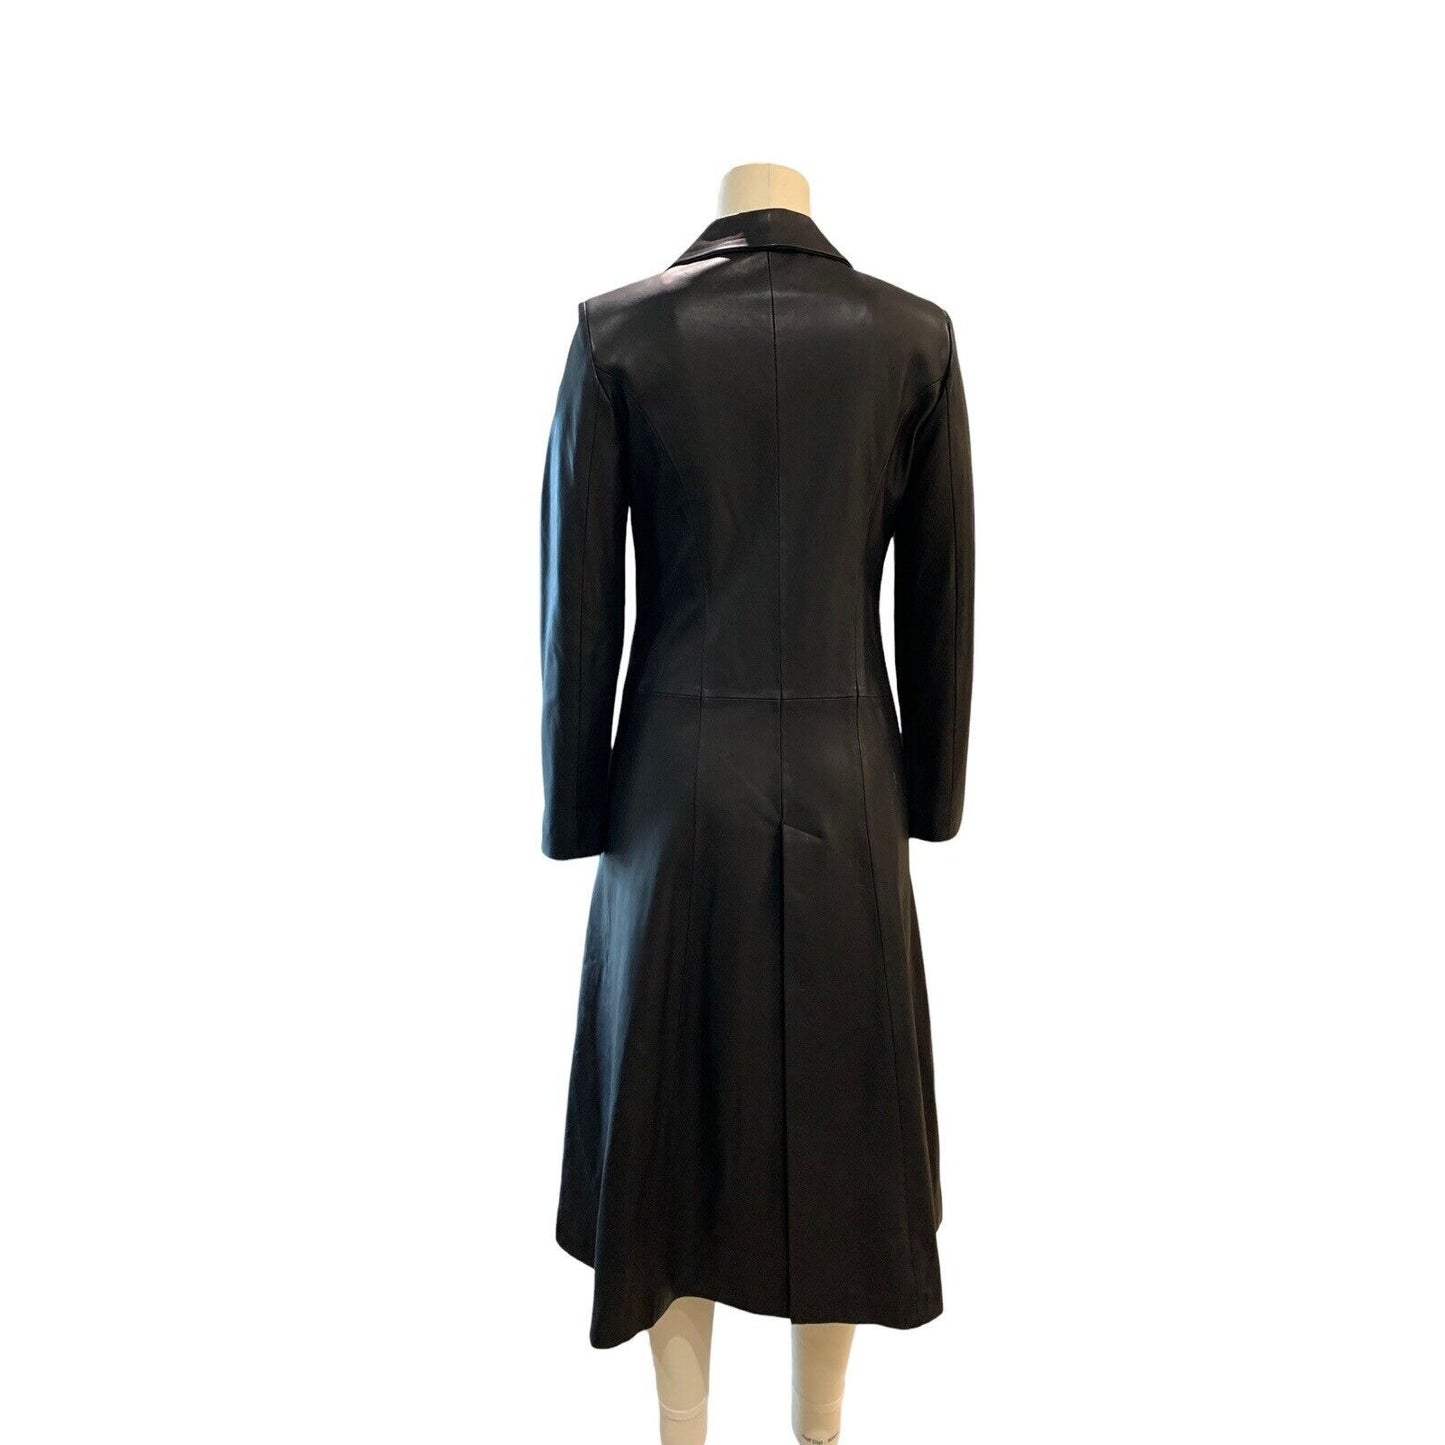 Back View Of Women's Long Leather Trench Coat